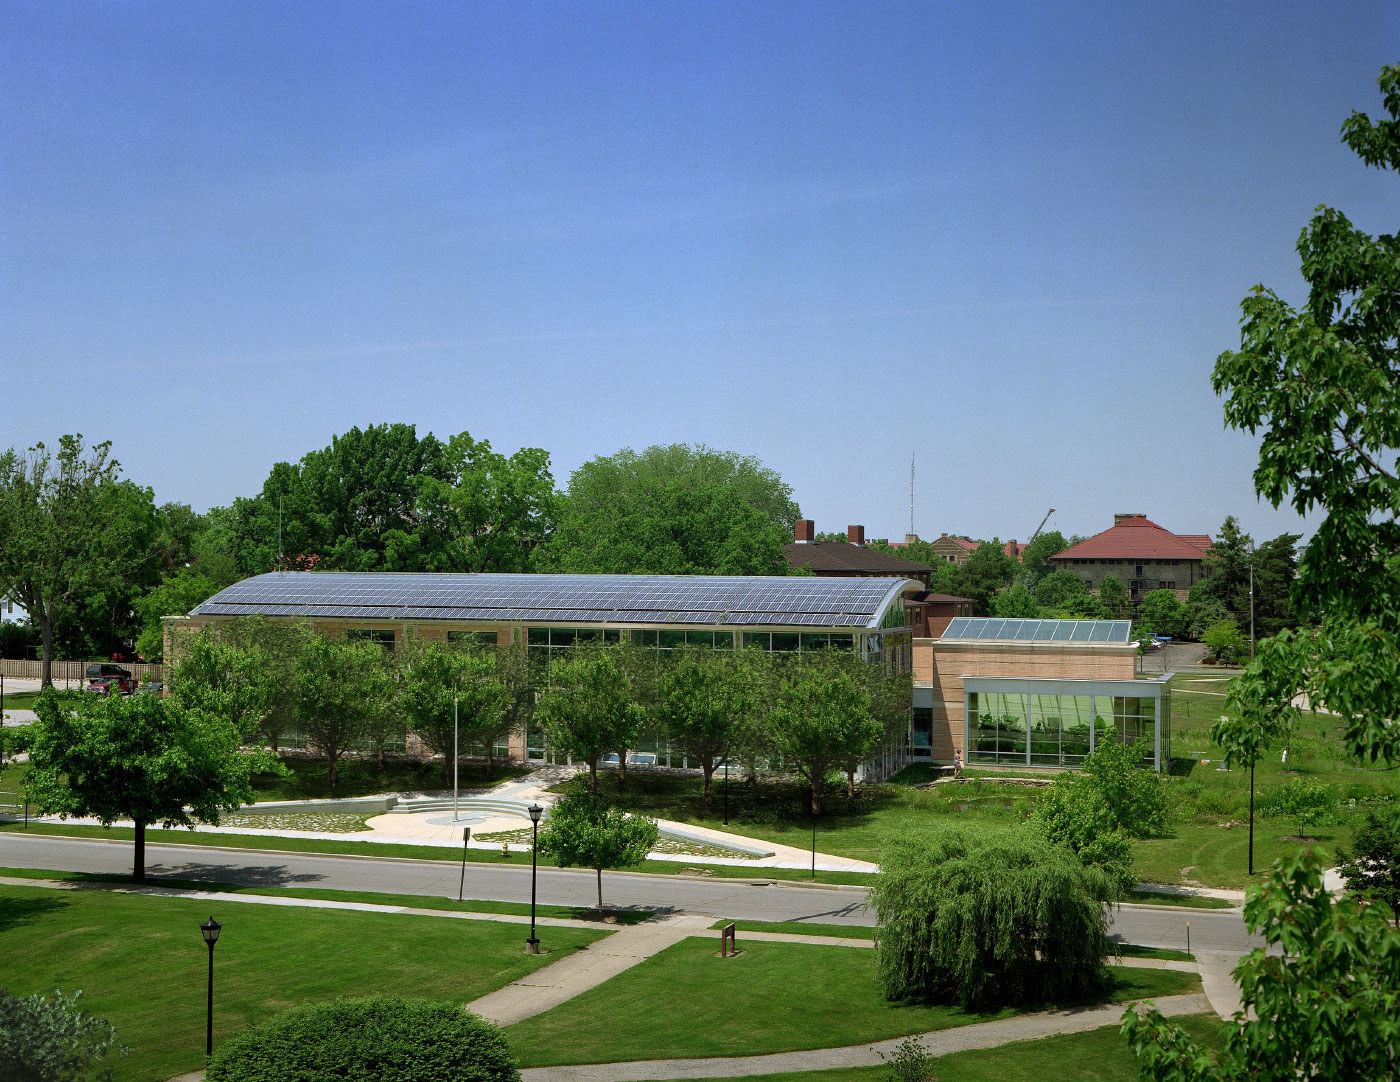 Curved Standing Seam Metal Roof Generates Energy for the Net-Zero Adam J Lewis Environmental Studies Center at Oberlin College by Virginia Green Architect.